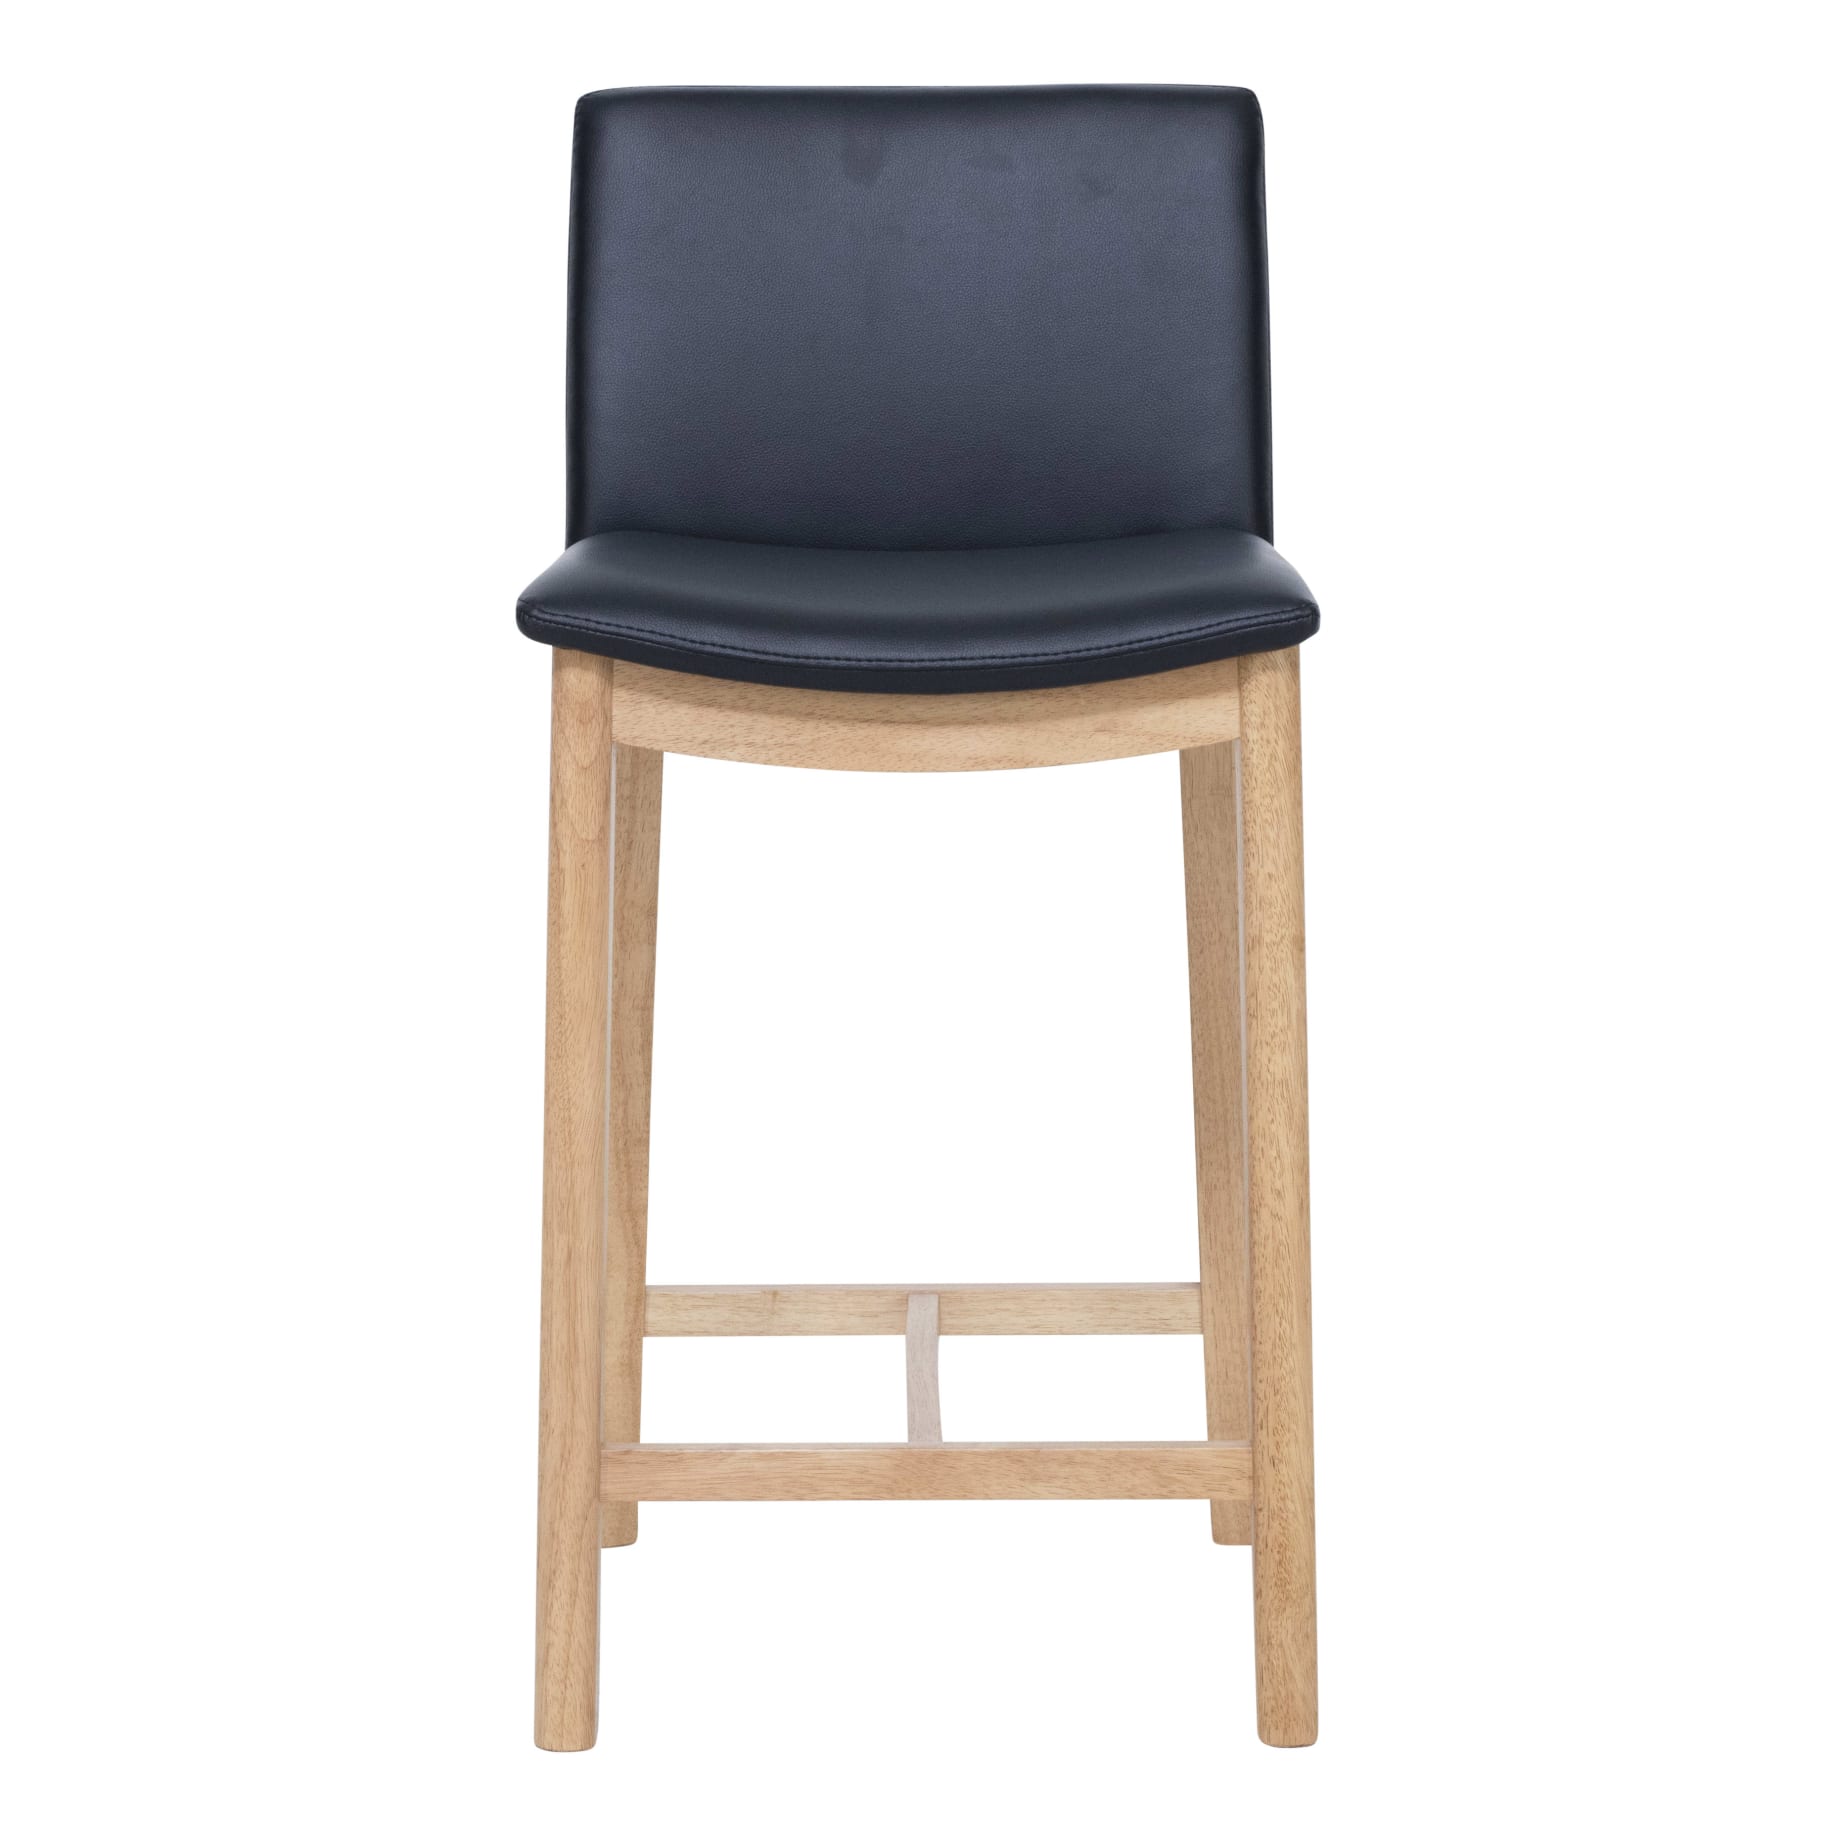 Everest Bar Chair in Leather Black / Oak Stain